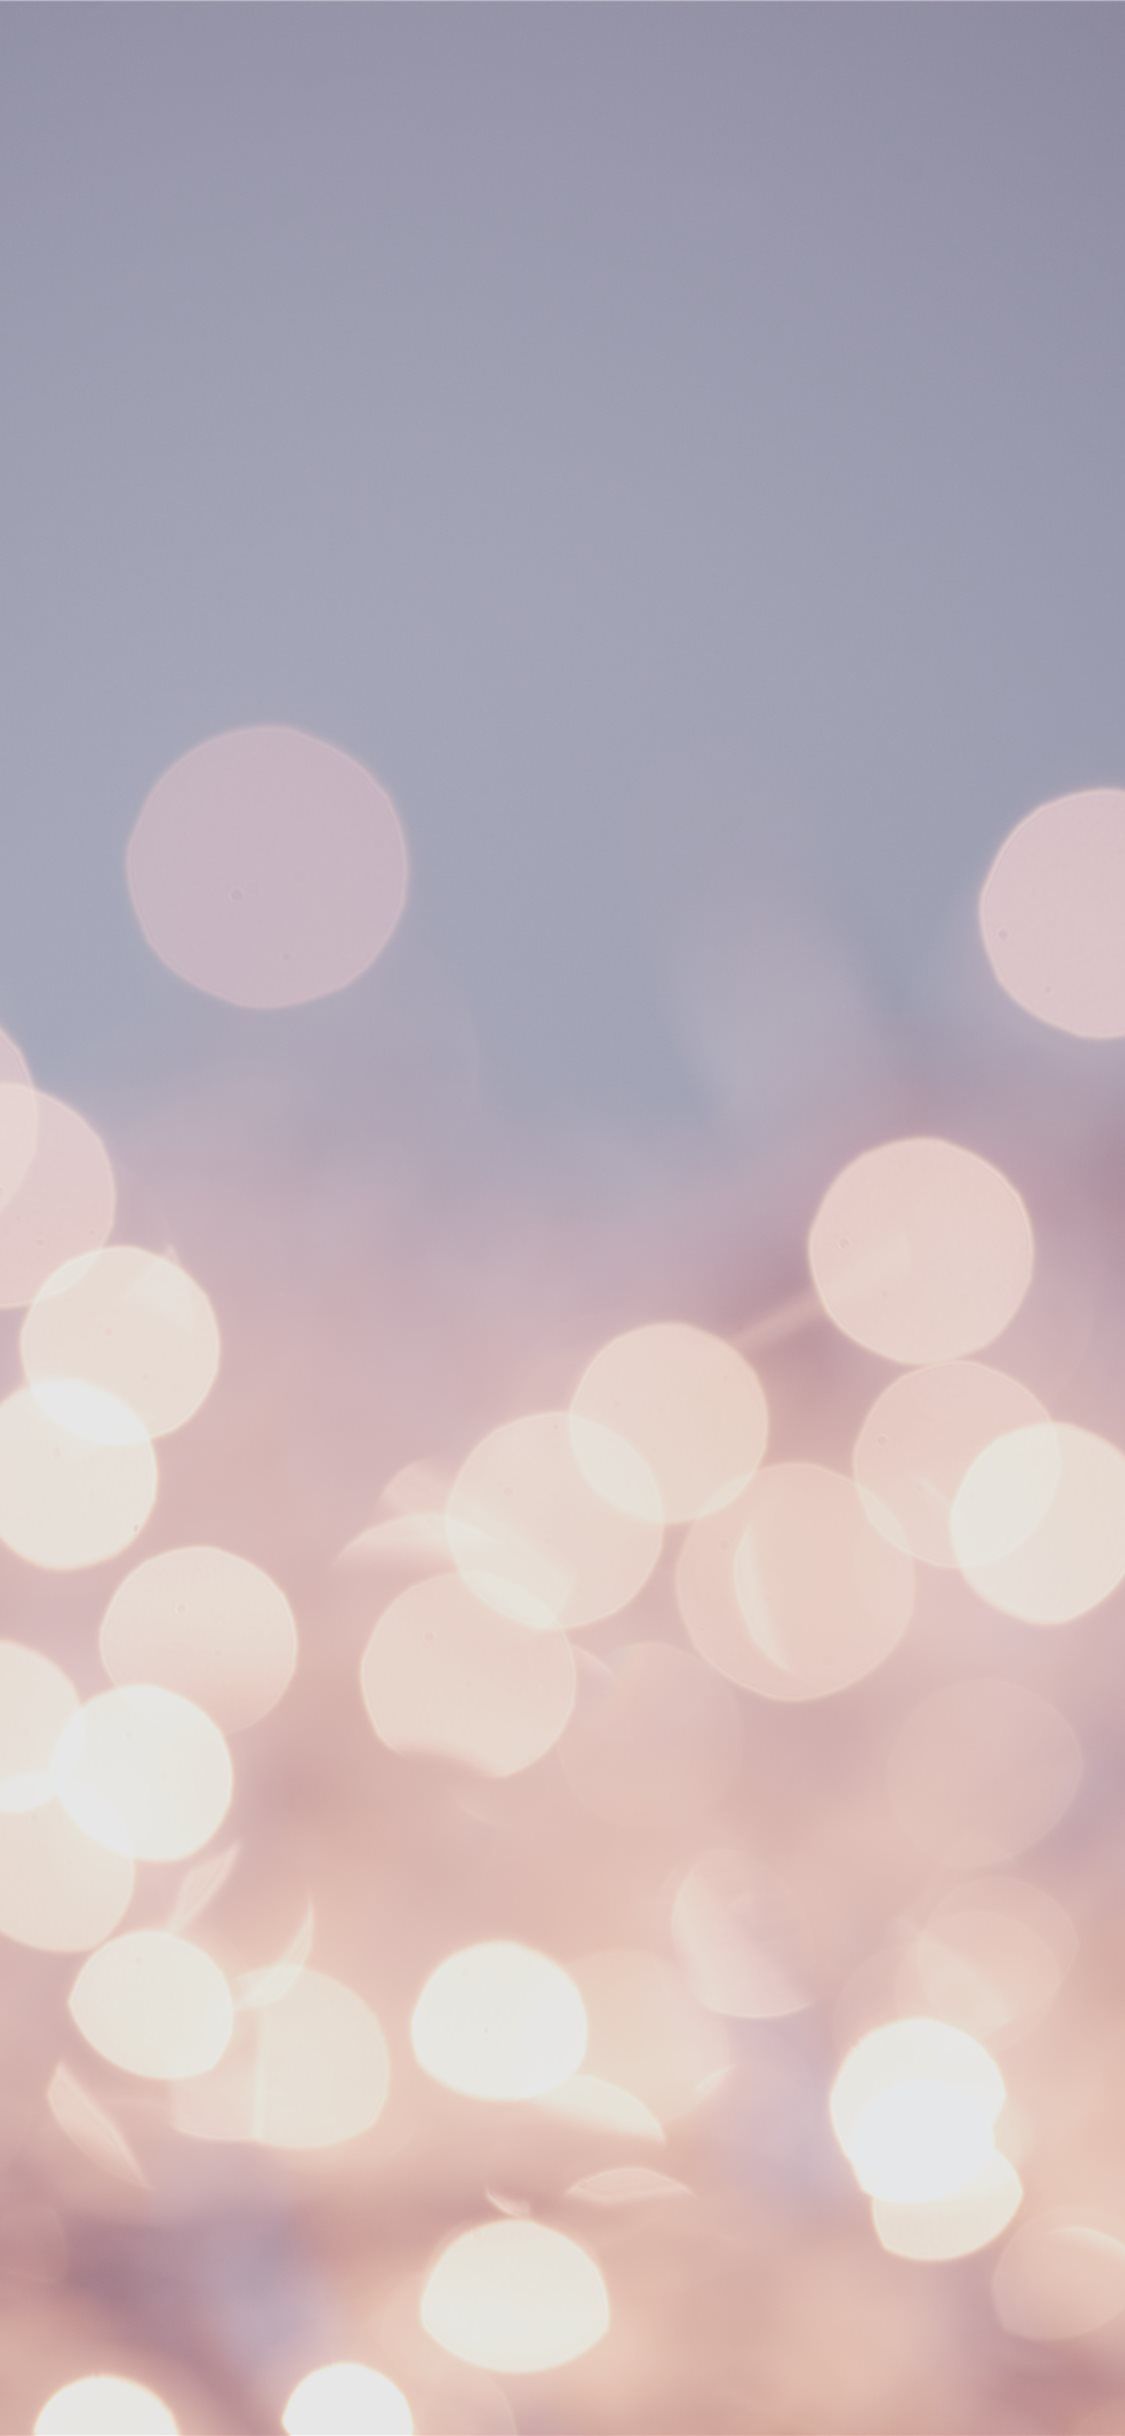 Pretty pastel bokeh fairy lights background iPhone X Wallpaper Free Download